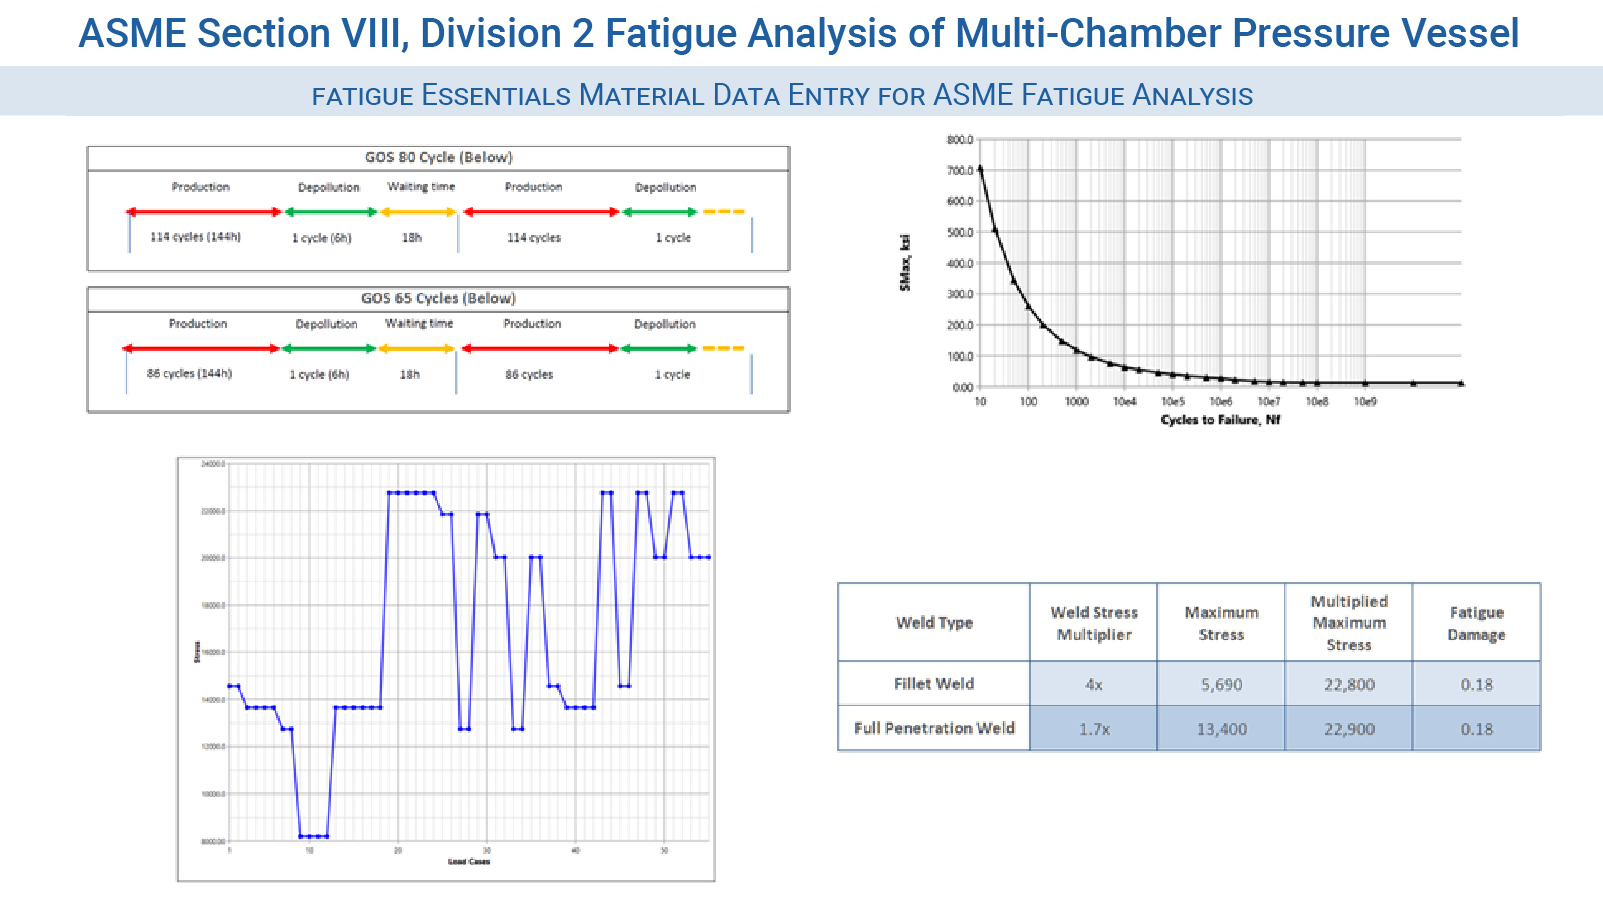 FEA Consulting Services - ASME Section VIII, Division 2 Fatigue Analysis of Multi-Chamber Pressure Vessel  